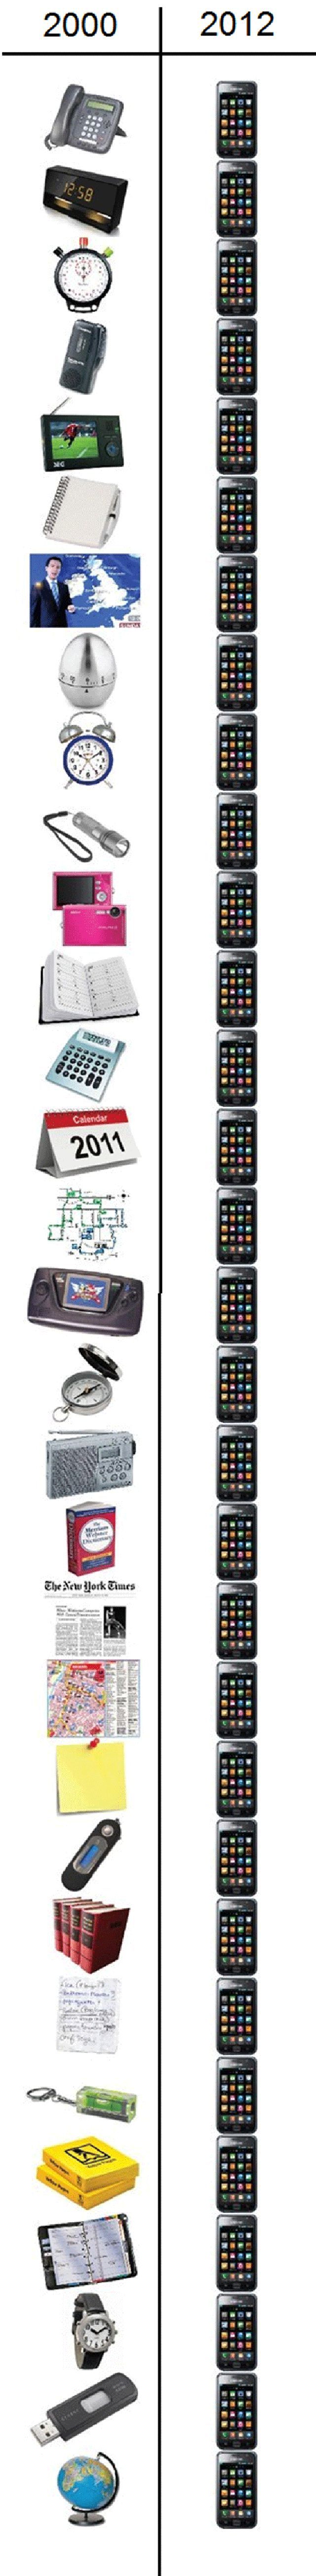 The Gadgets of 2000 vs. Today